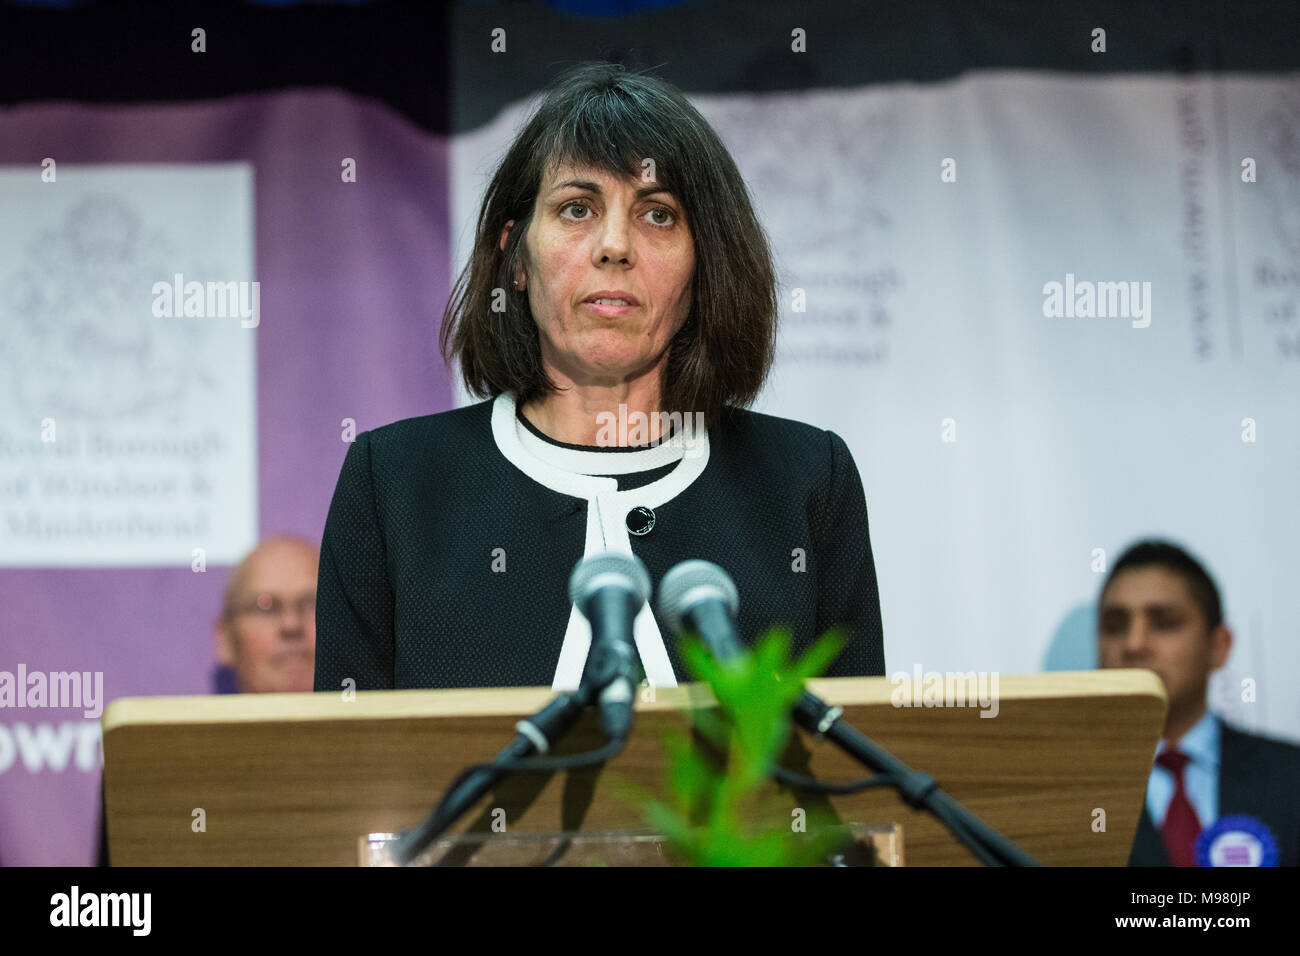 Maidenhead, UK. 8th June, 2017. Alison Alexander, returning officer of the Royal Borough of Windsor and Maidenhead, announces the general election res Stock Photo